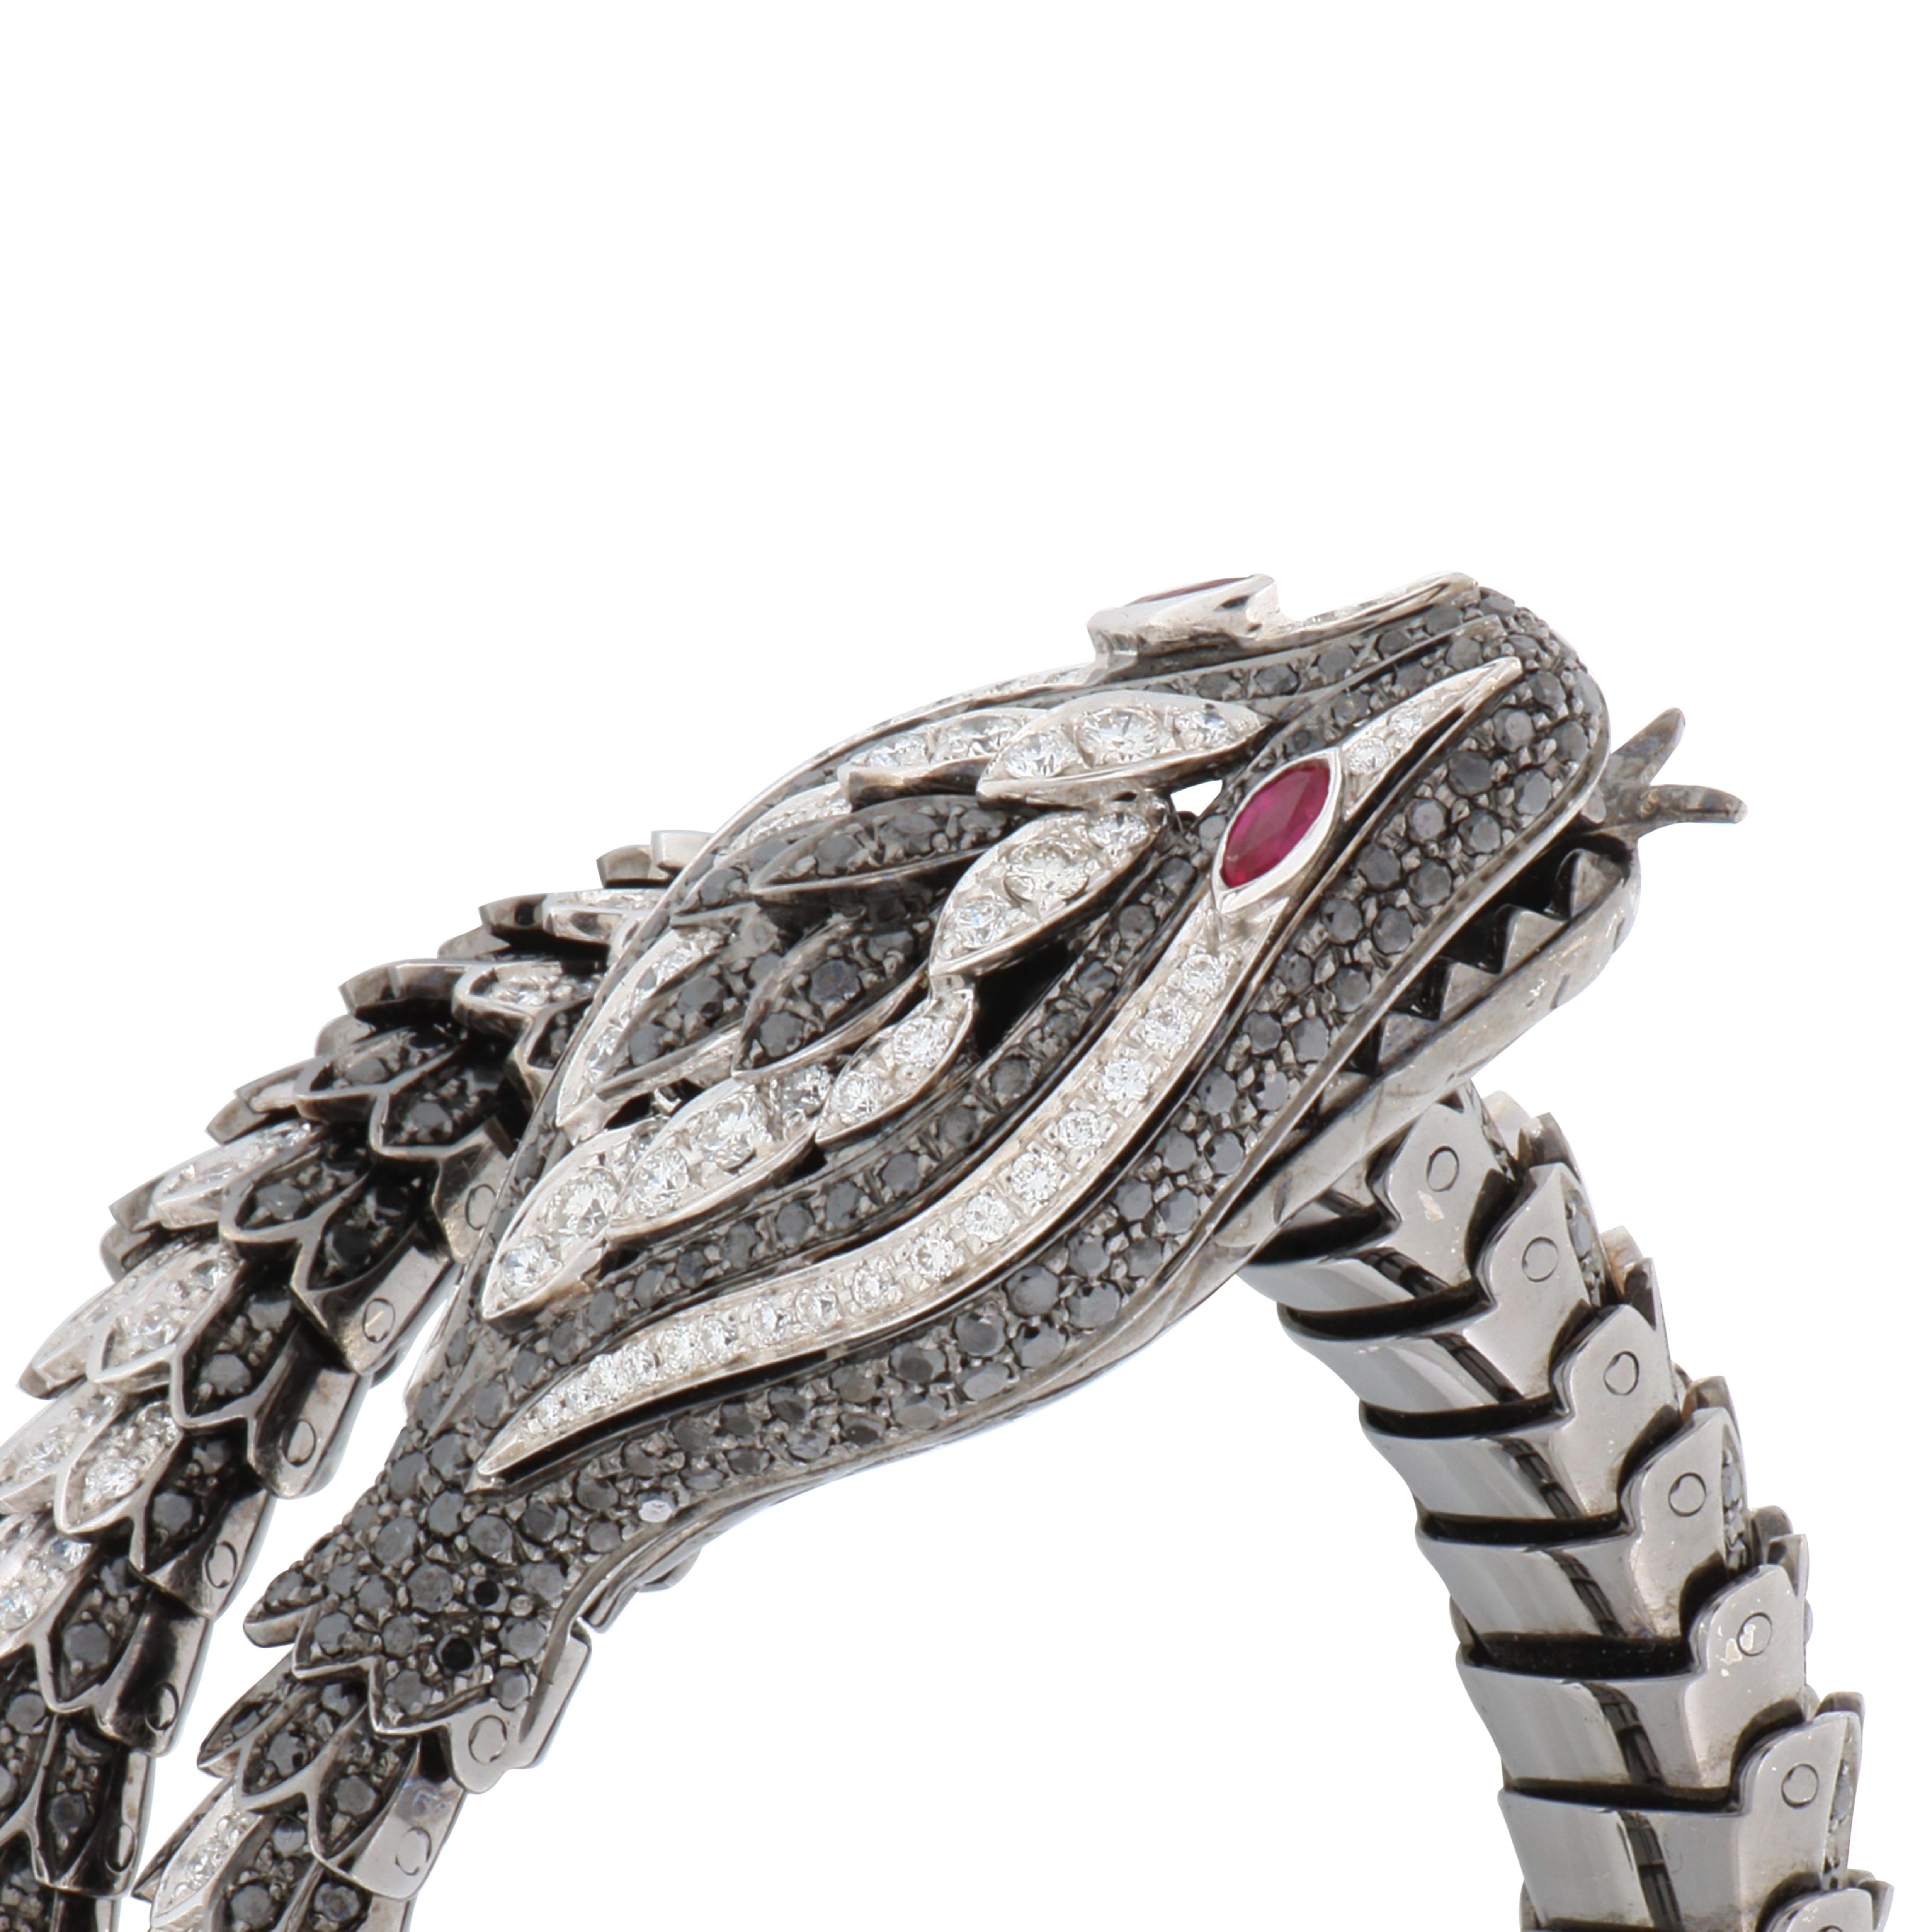 Snakes have always fasciated humans. This majestic animal is a symbol of good omen, power and rebirth.
This 18kt snake bracelet feature 3.04ct of white diamonds, 7.5 ct of black diamonds and 0.15ct of rubies.

Handcrafted by some of the most skilled